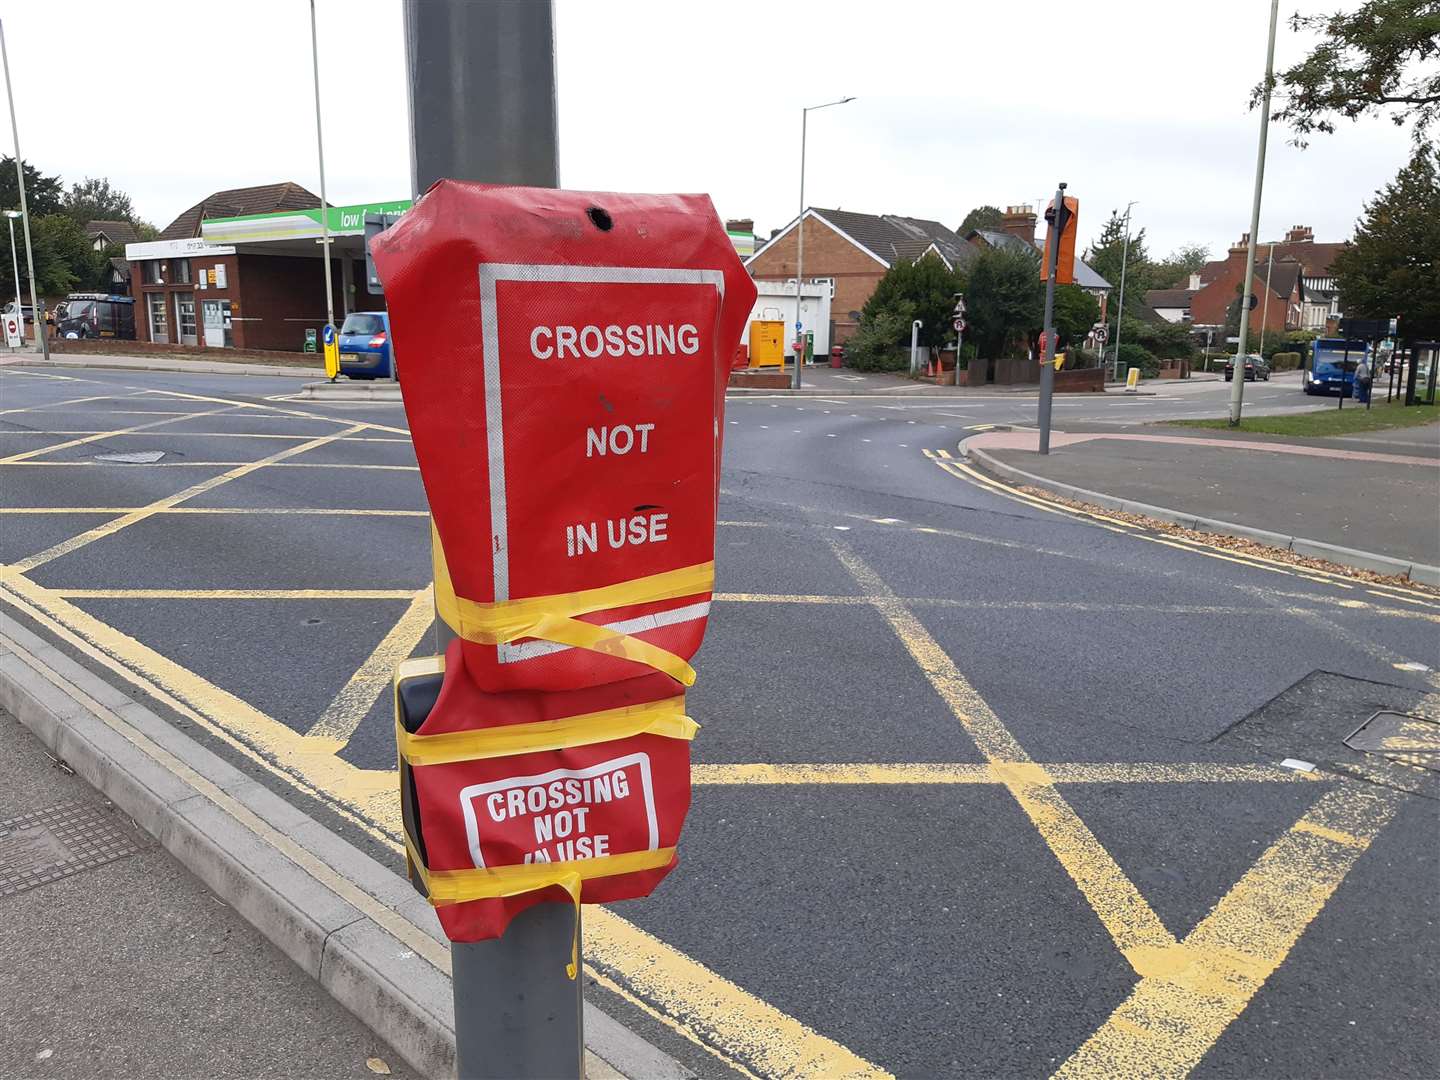 Pedestrian crossings were still out of use yesterday, but are now working again